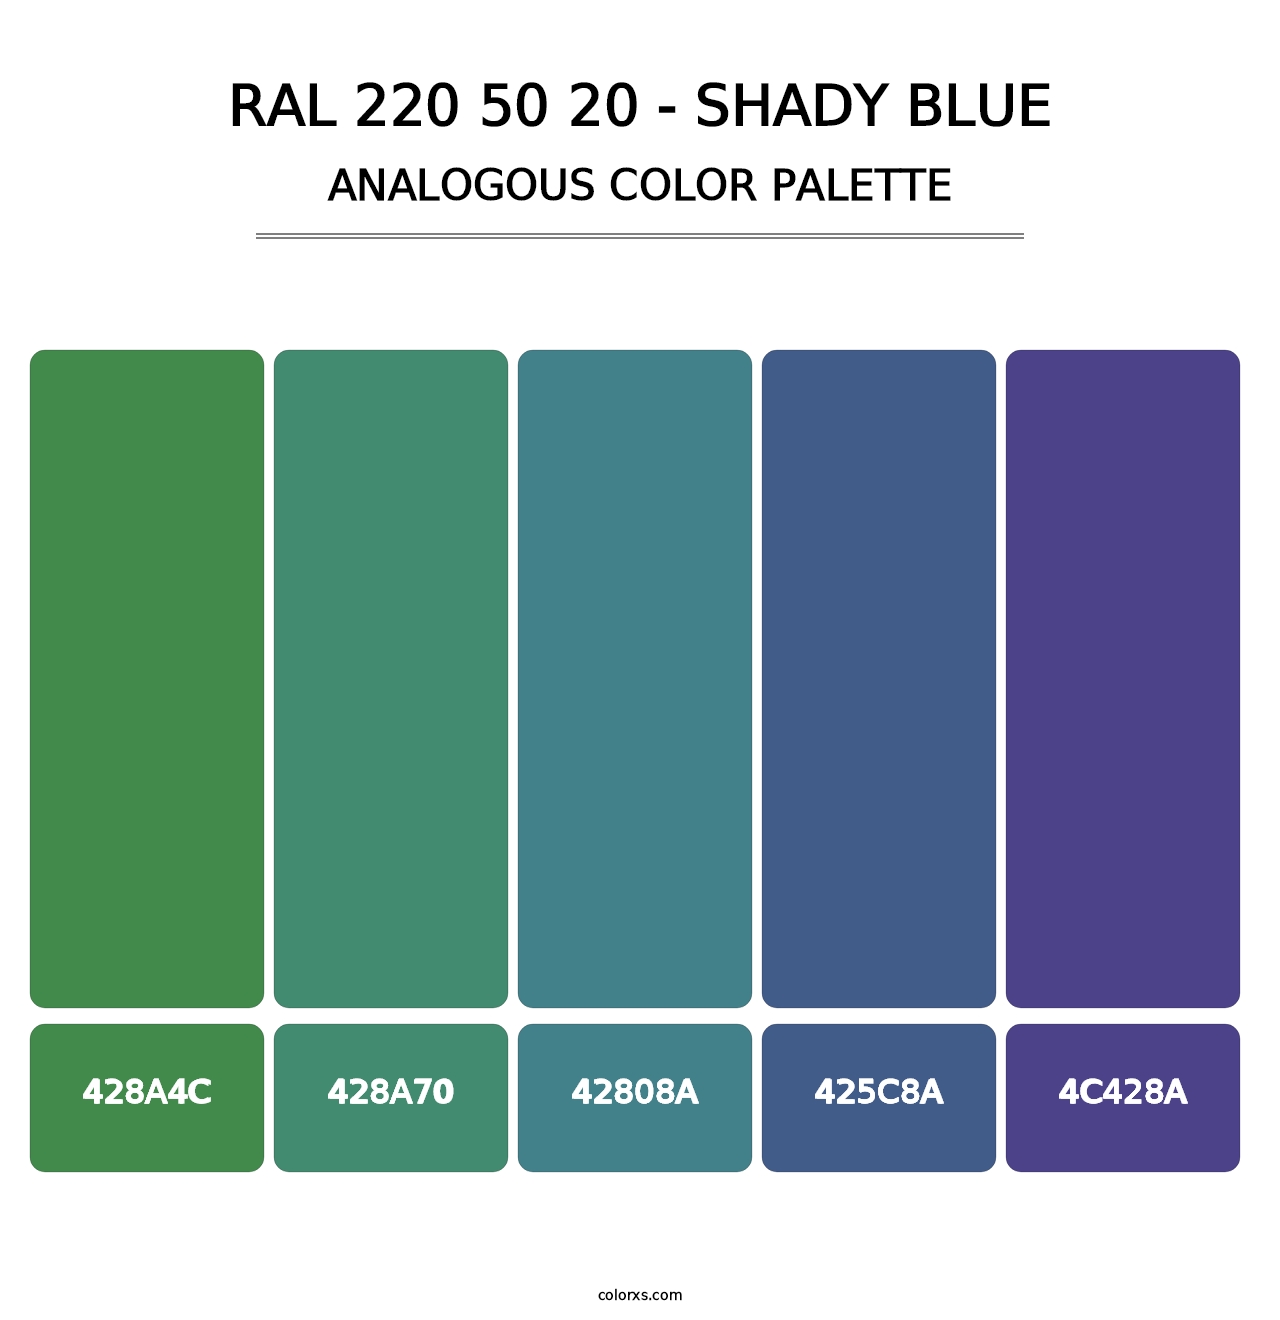 RAL 220 50 20 - Shady Blue - Analogous Color Palette